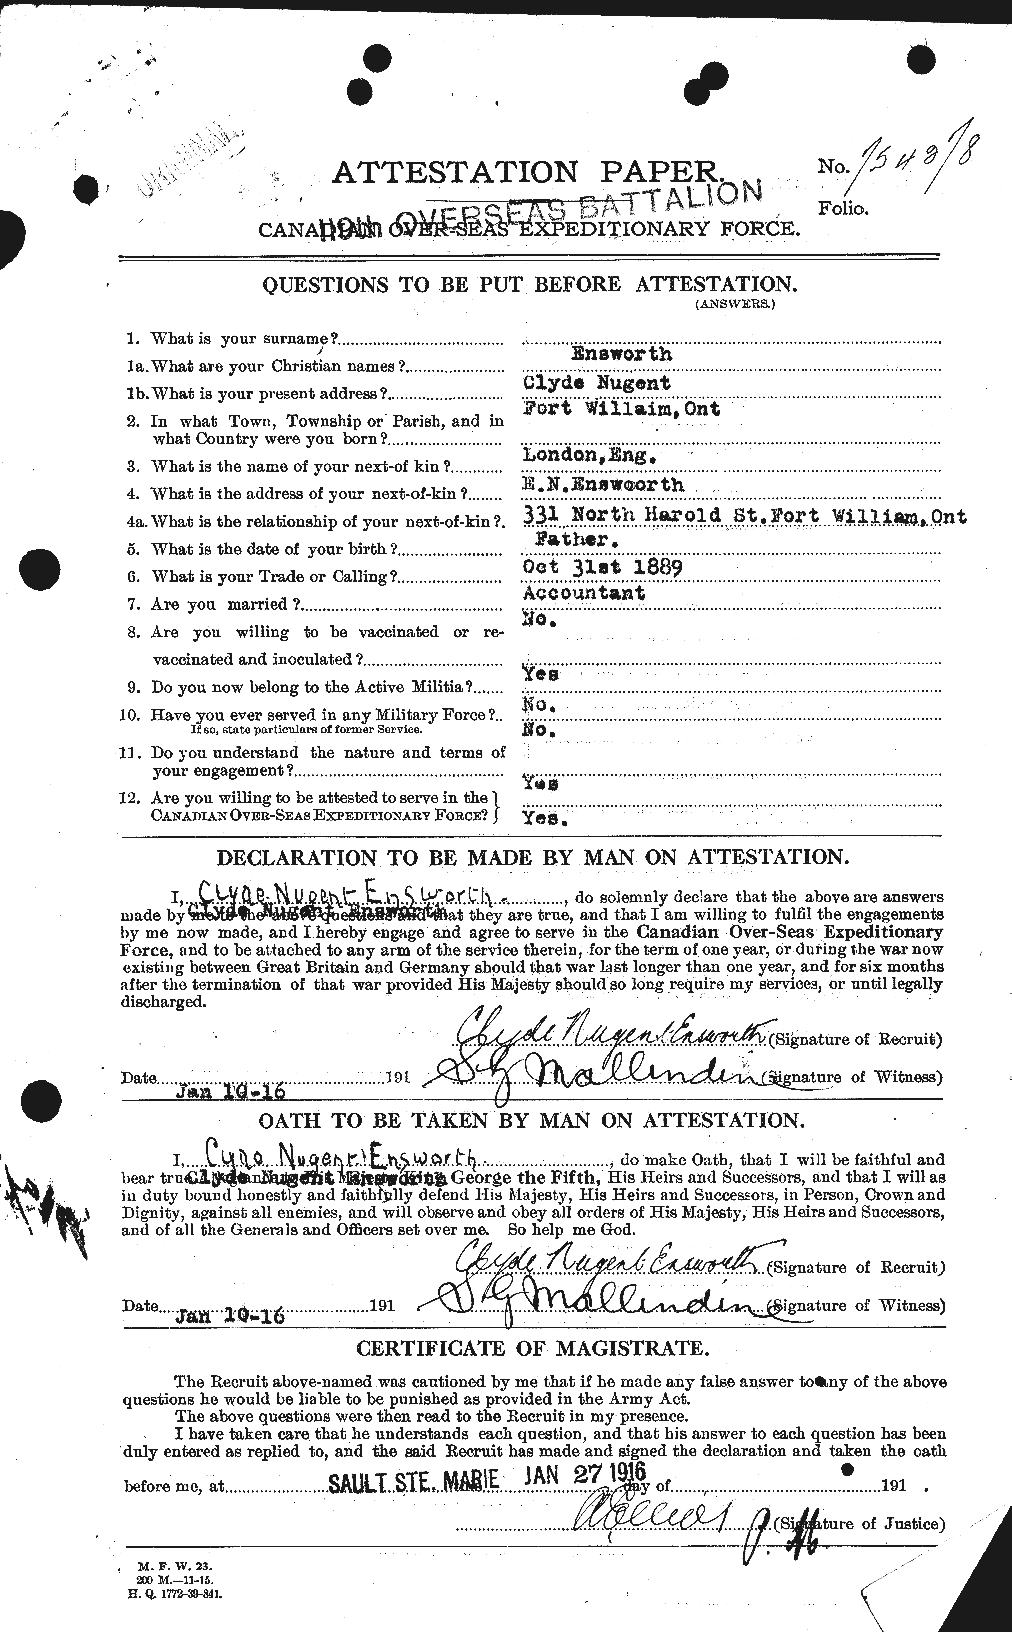 Personnel Records of the First World War - CEF 312424a